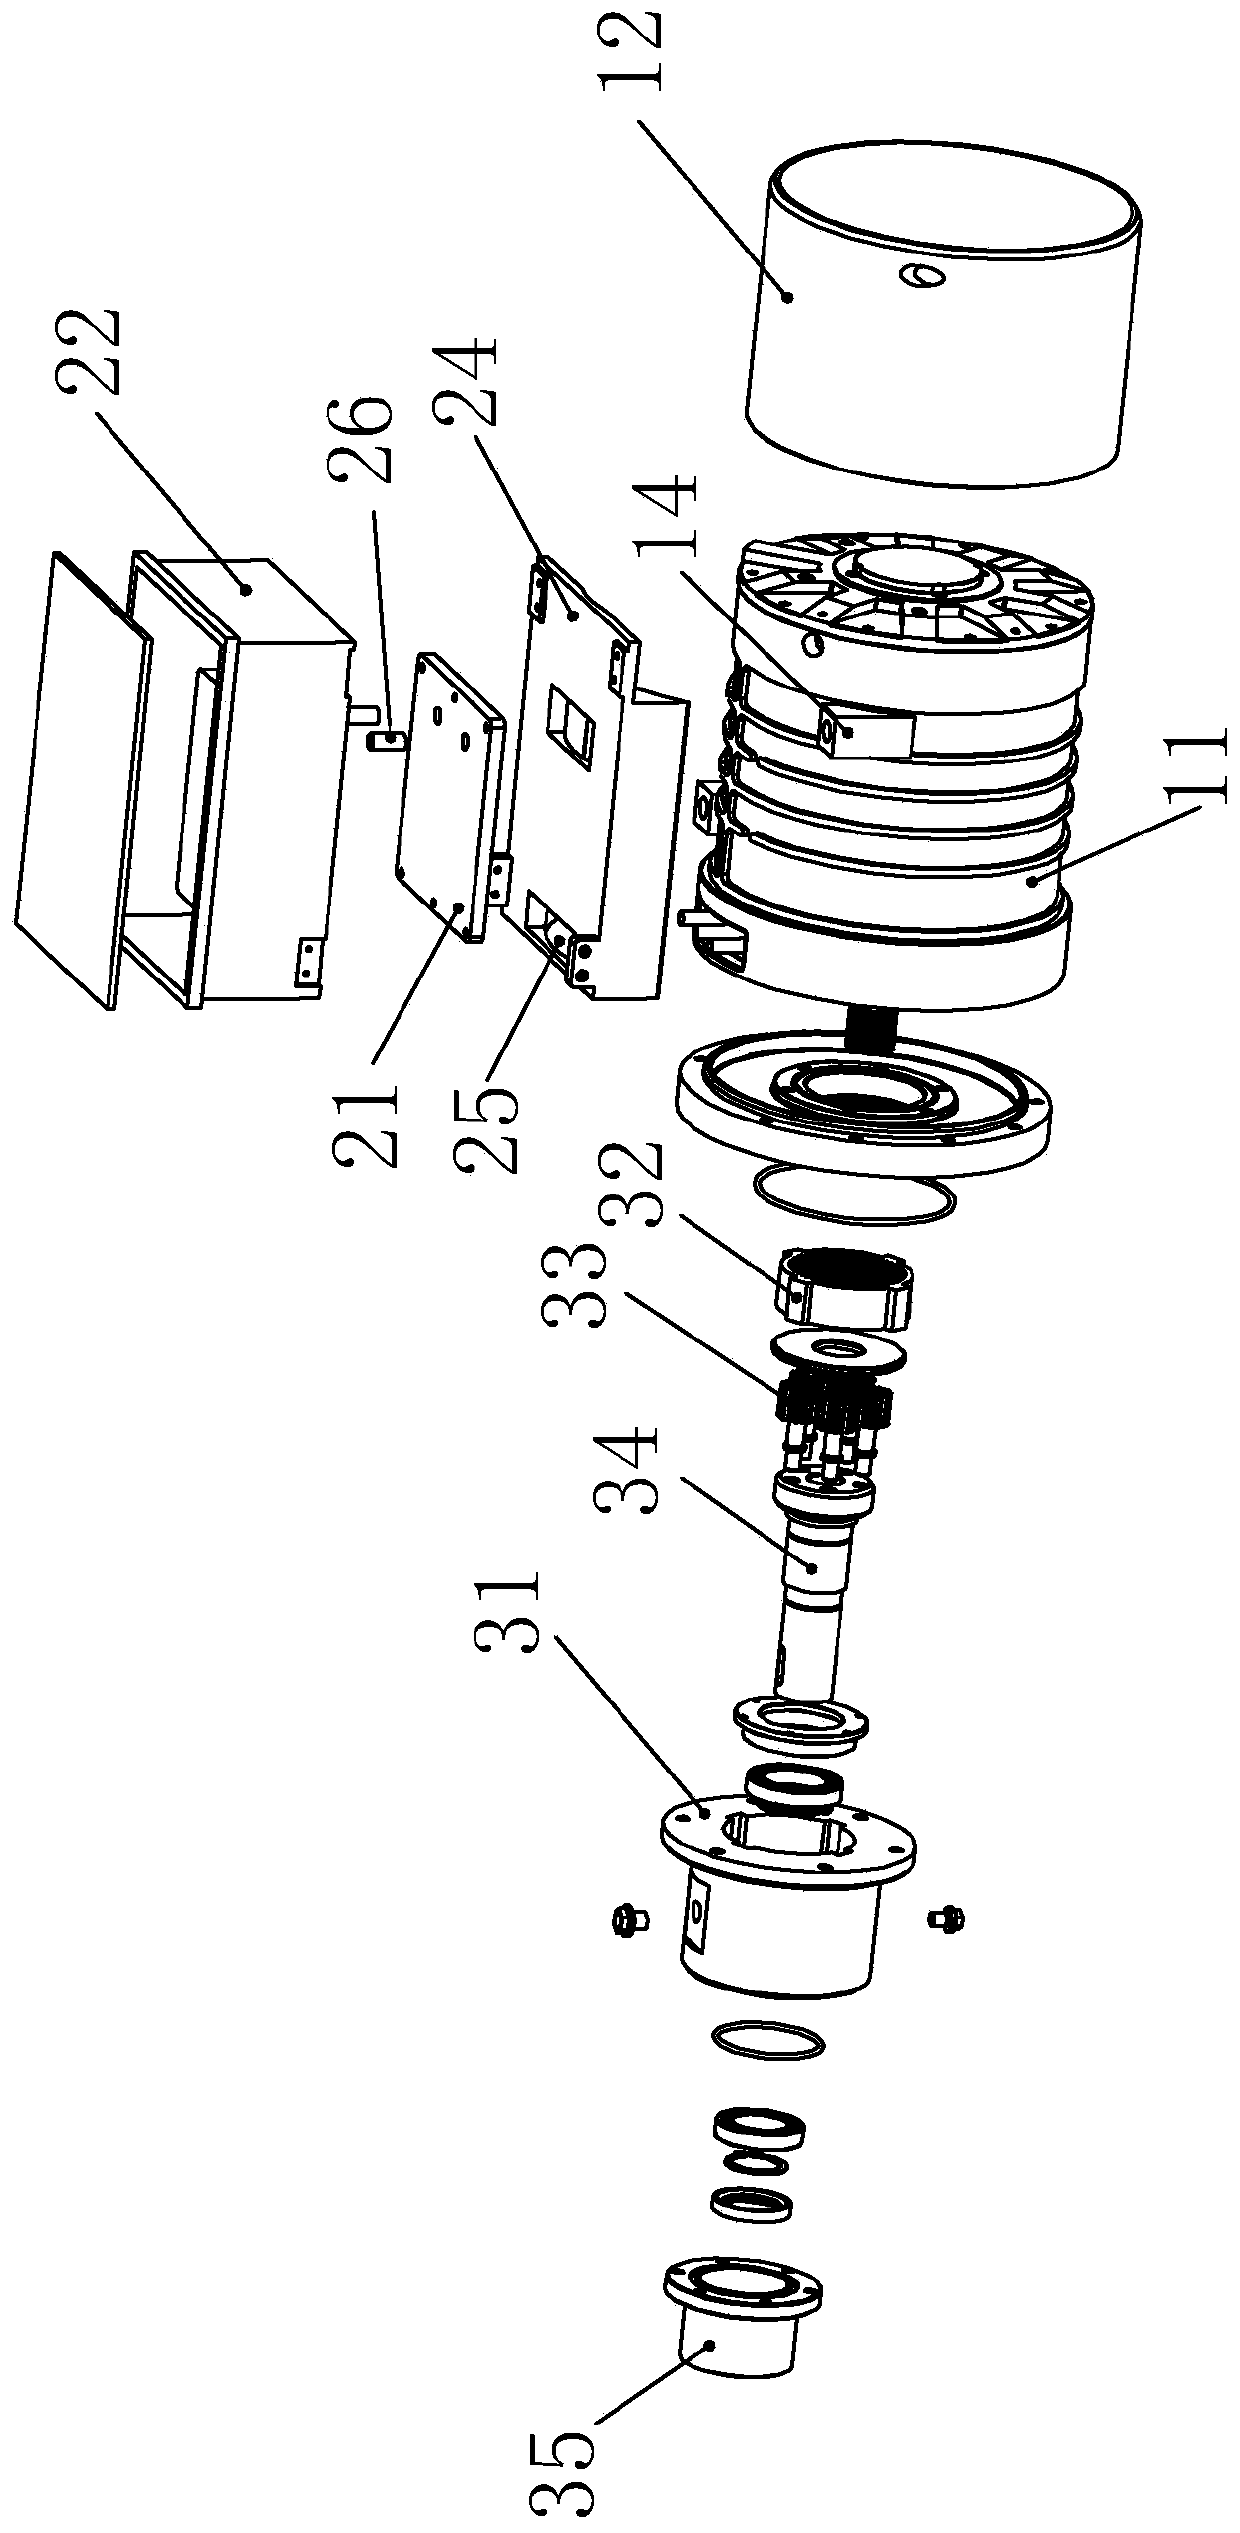 Motor and controller integrated structure water cooling system